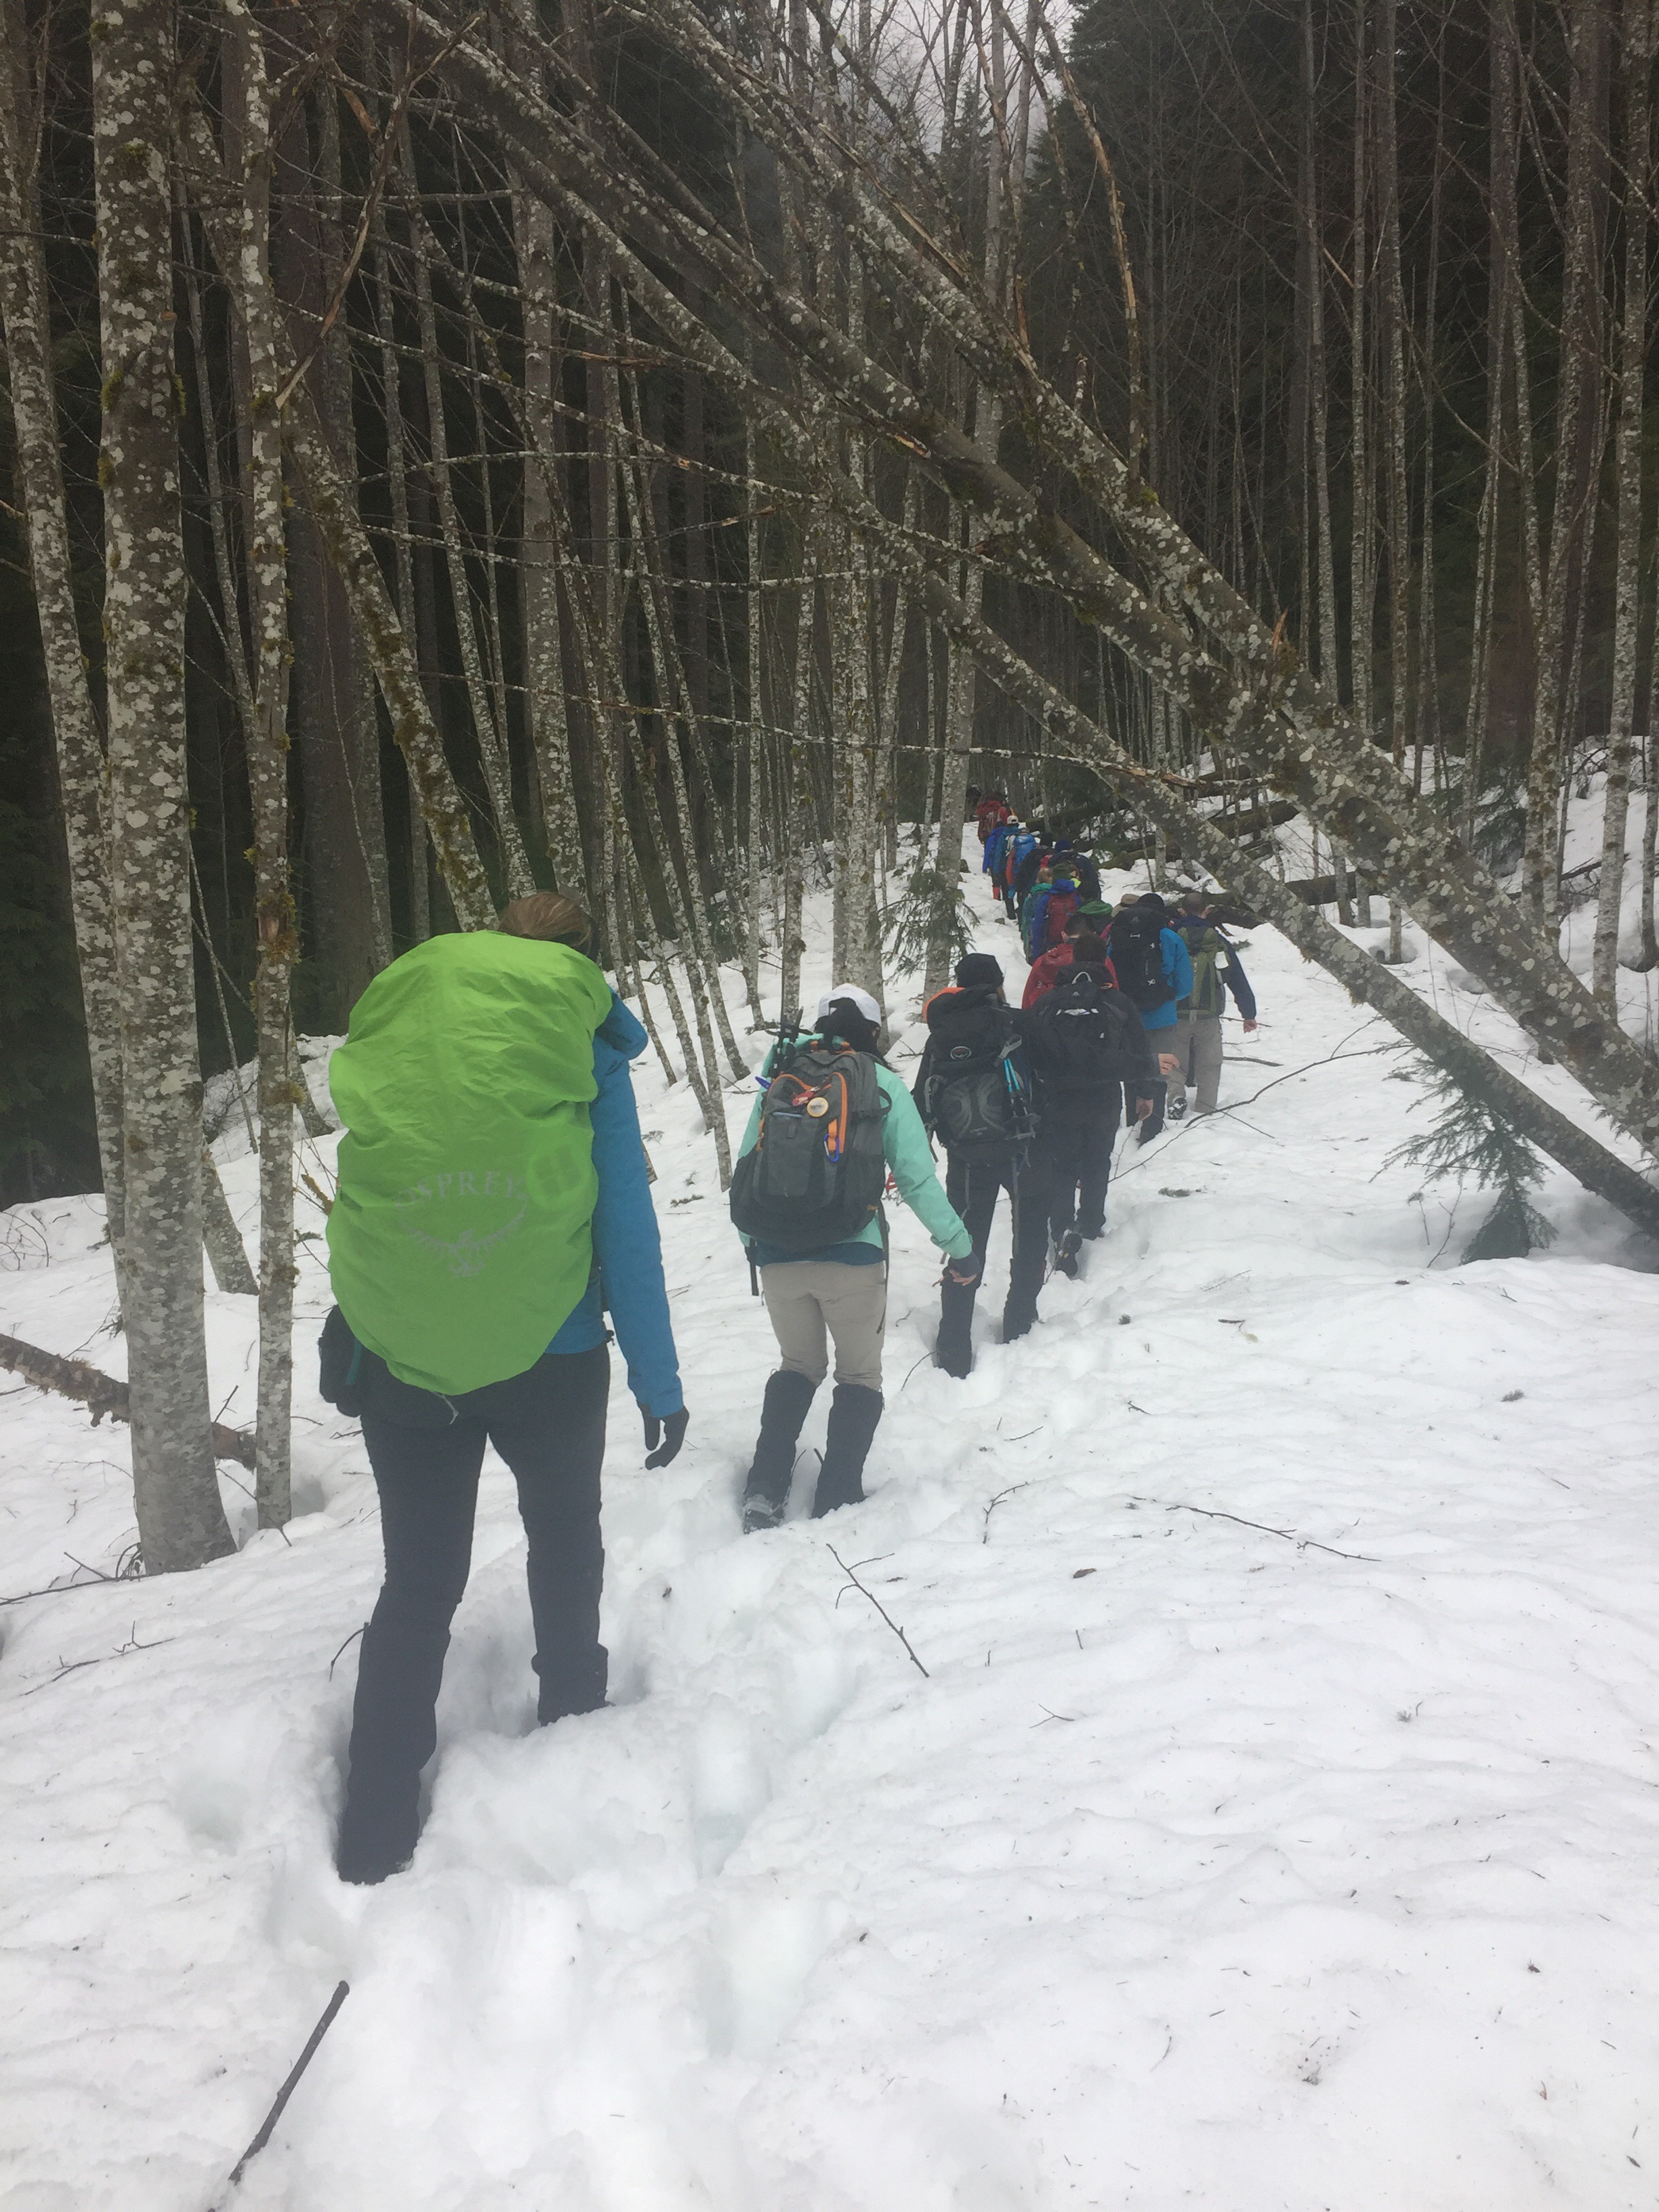 A line of hikers walking in the snow to the final navigation test for the Wilderness First Aid class